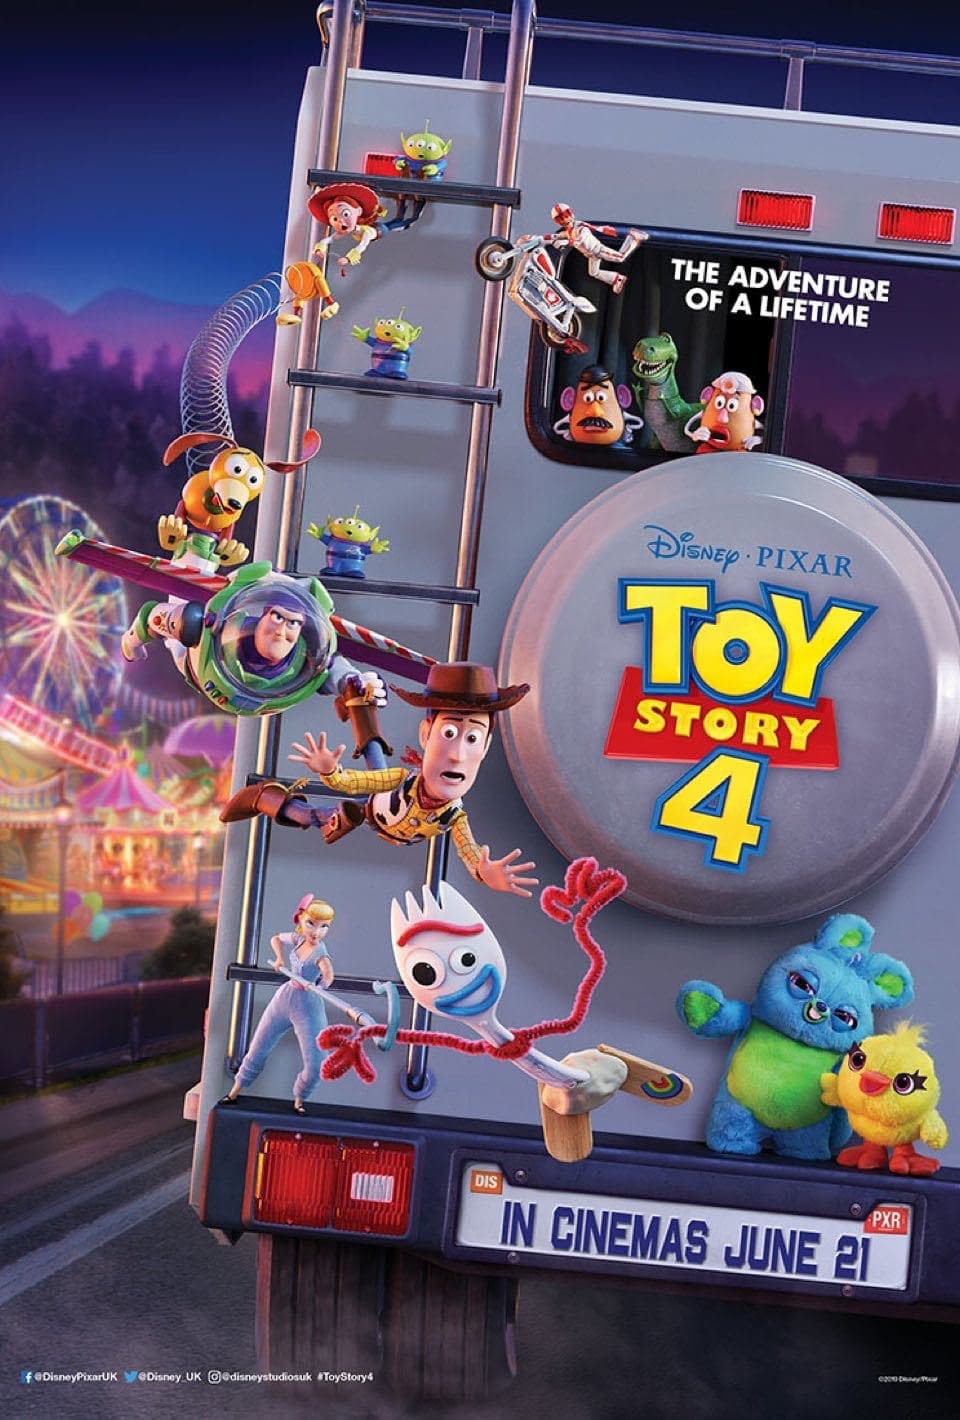 Toy Story 4 UK Trailer Shows Off New Footage Plus a New Poster